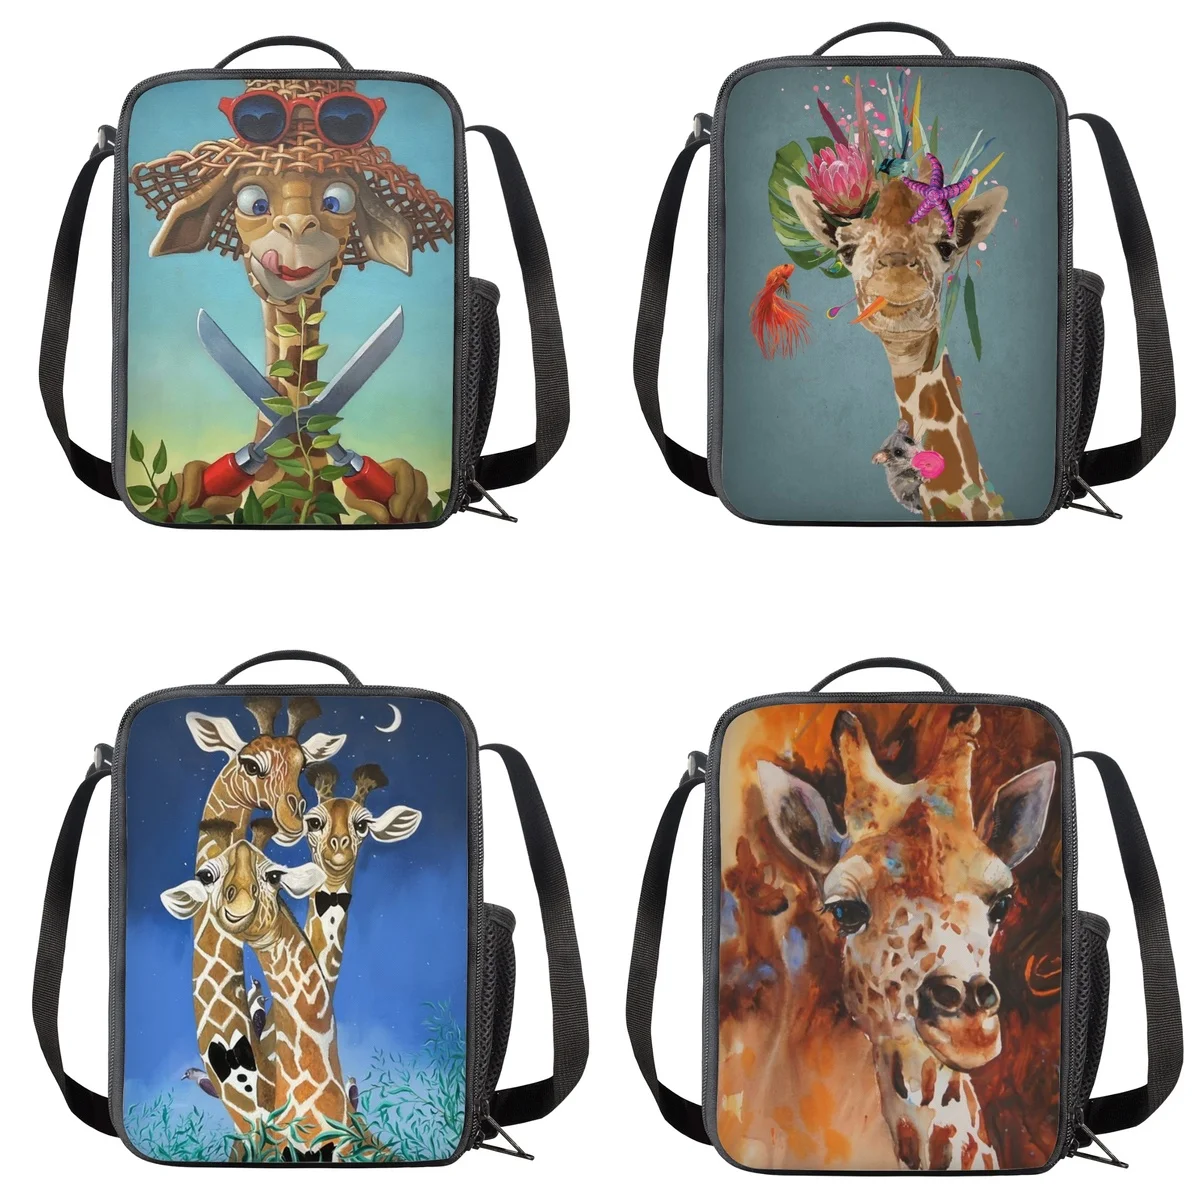 

Funny Giraffe Design Insulated Lunch Bags Portable Thermal Cooler Food Lunch Boxes for Kid Women Bento Box with Shoulder Strap